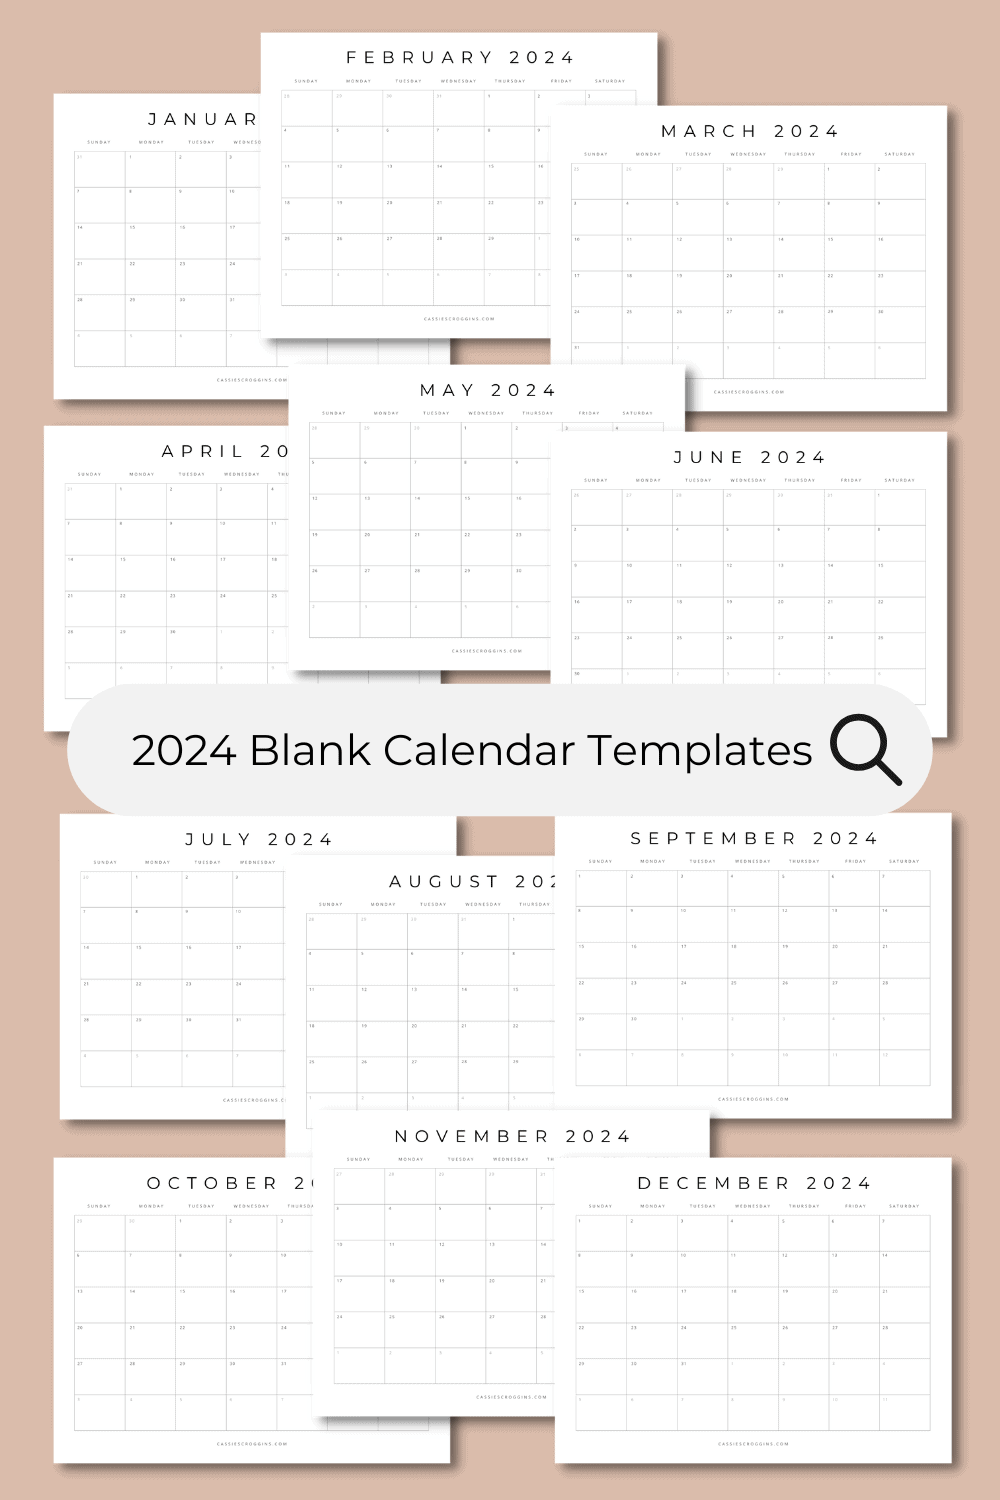 Free Printable 2024 Blank Calendar Templates (All 12 Months) regarding Free Printable August 2024 Monthly Calendar No Chrome Extensions